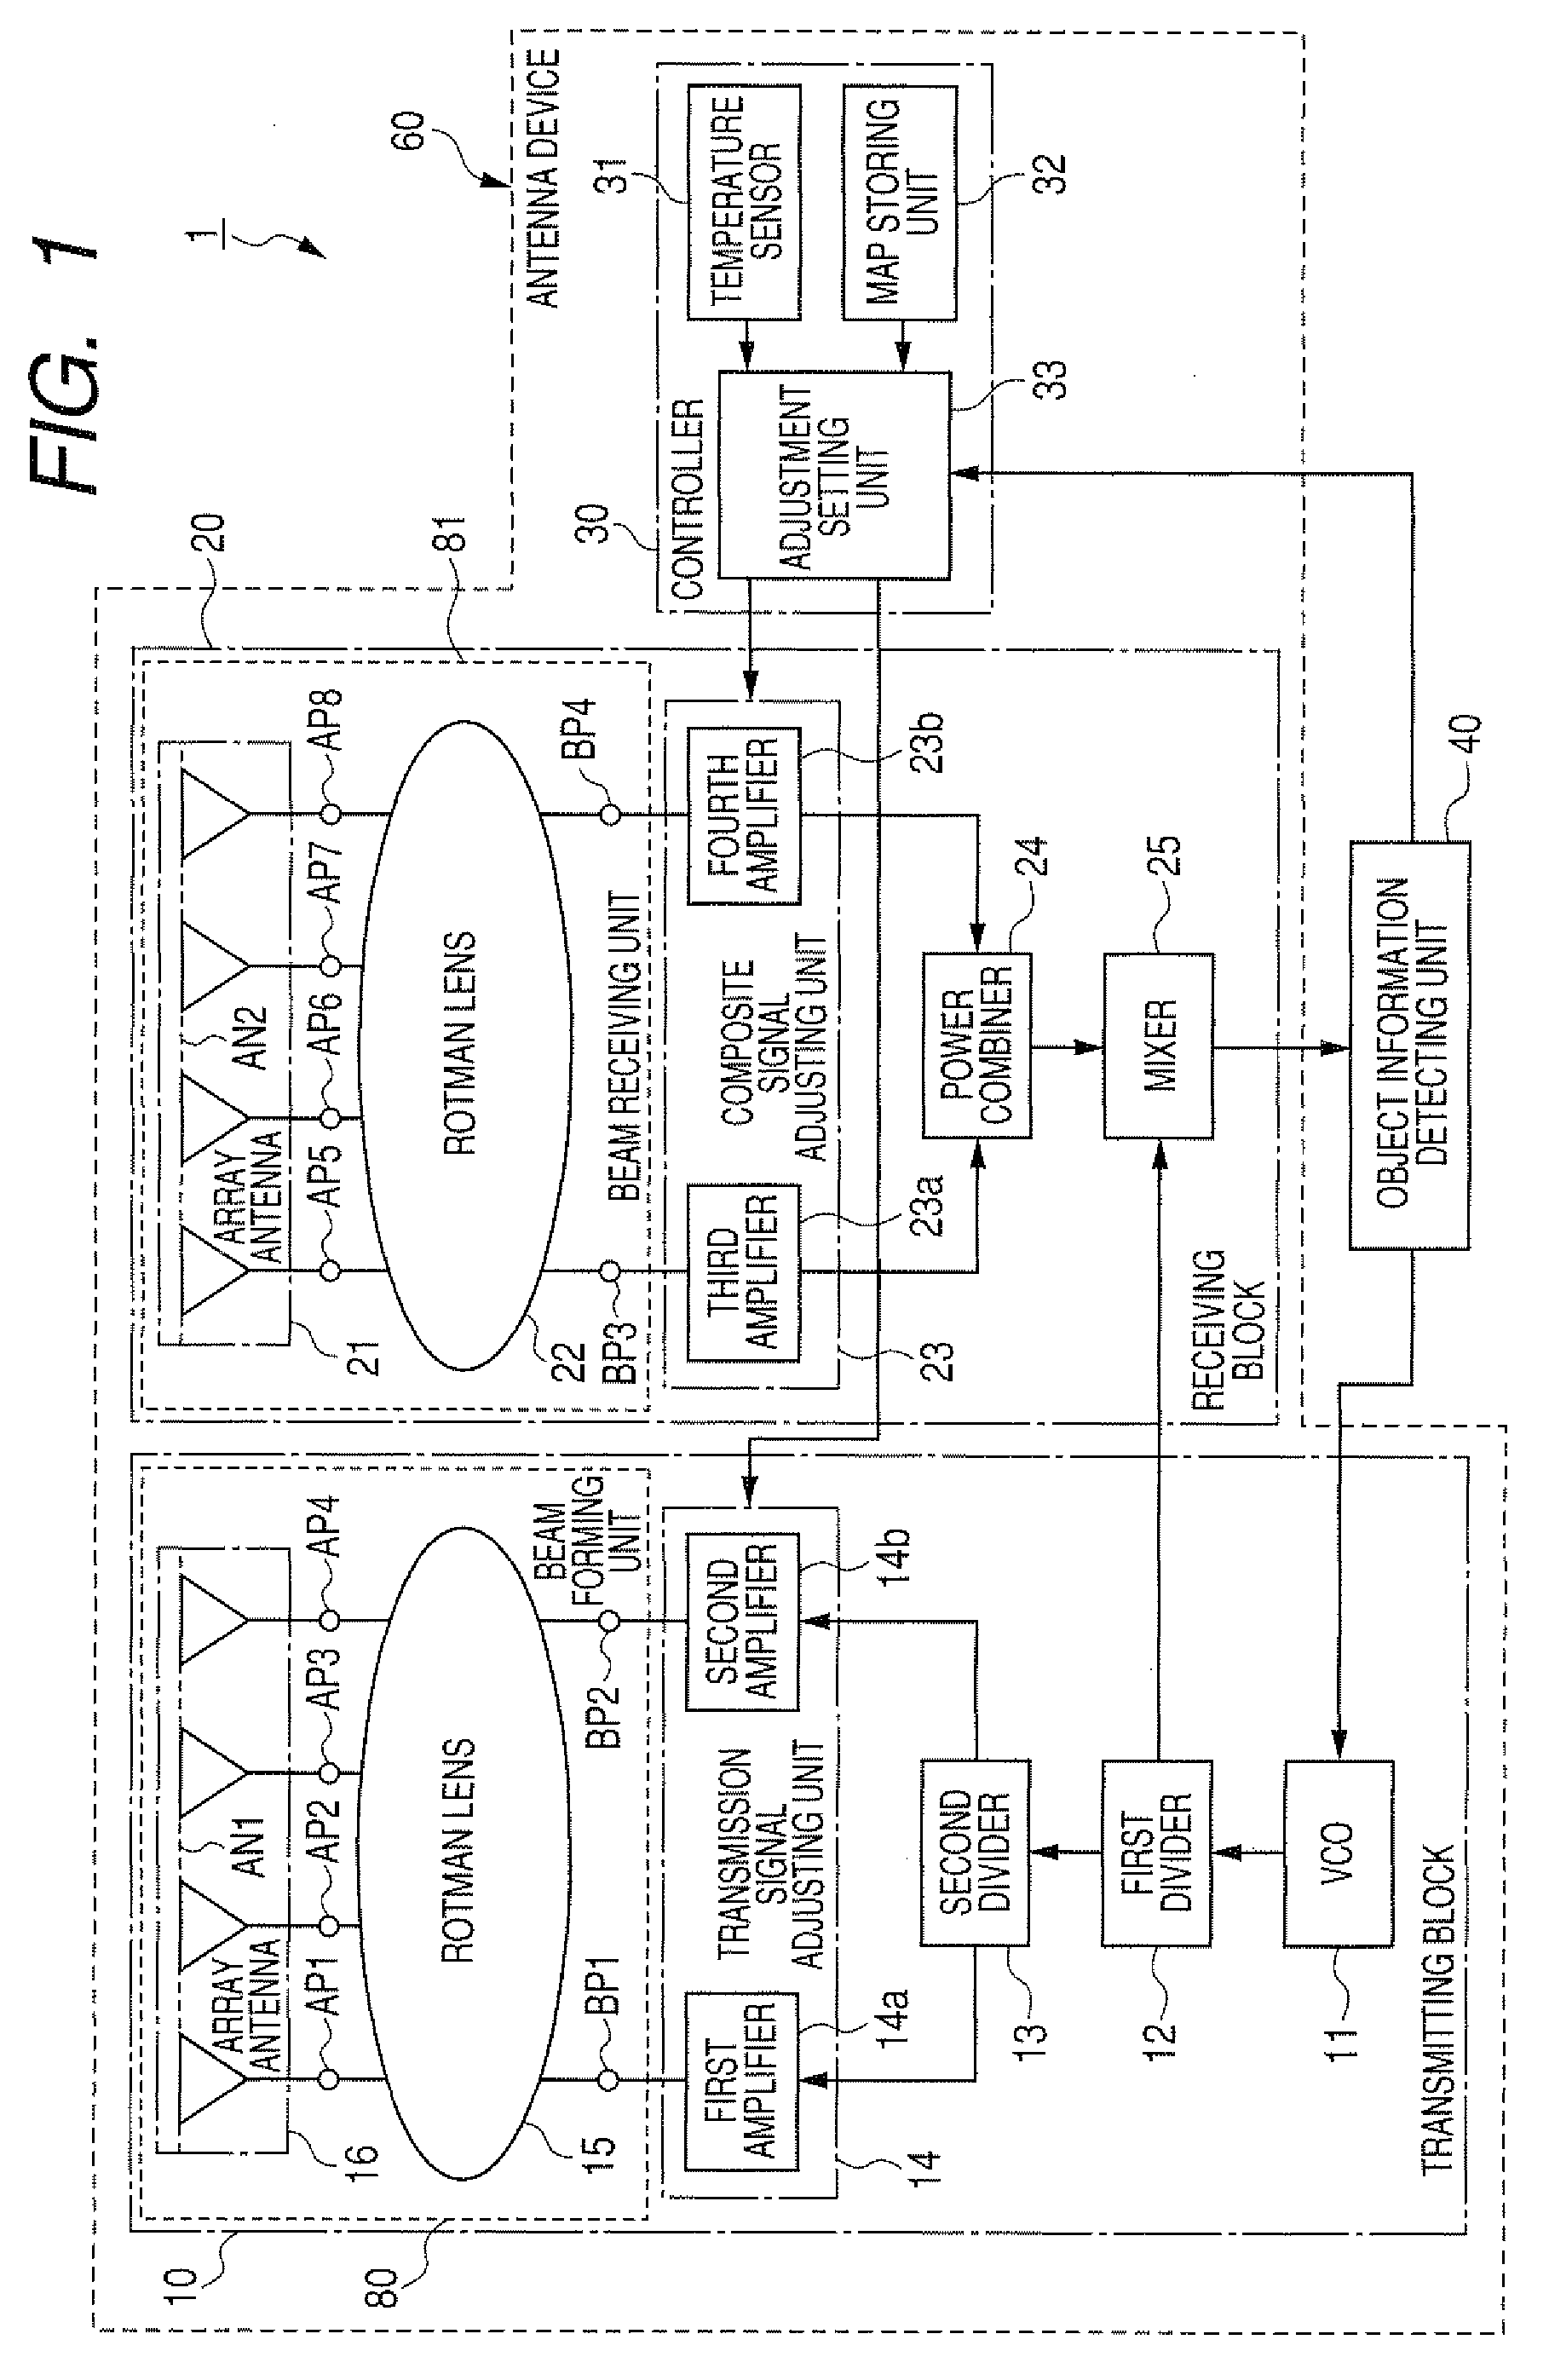 Antenna device with lens or passive element acting as lens